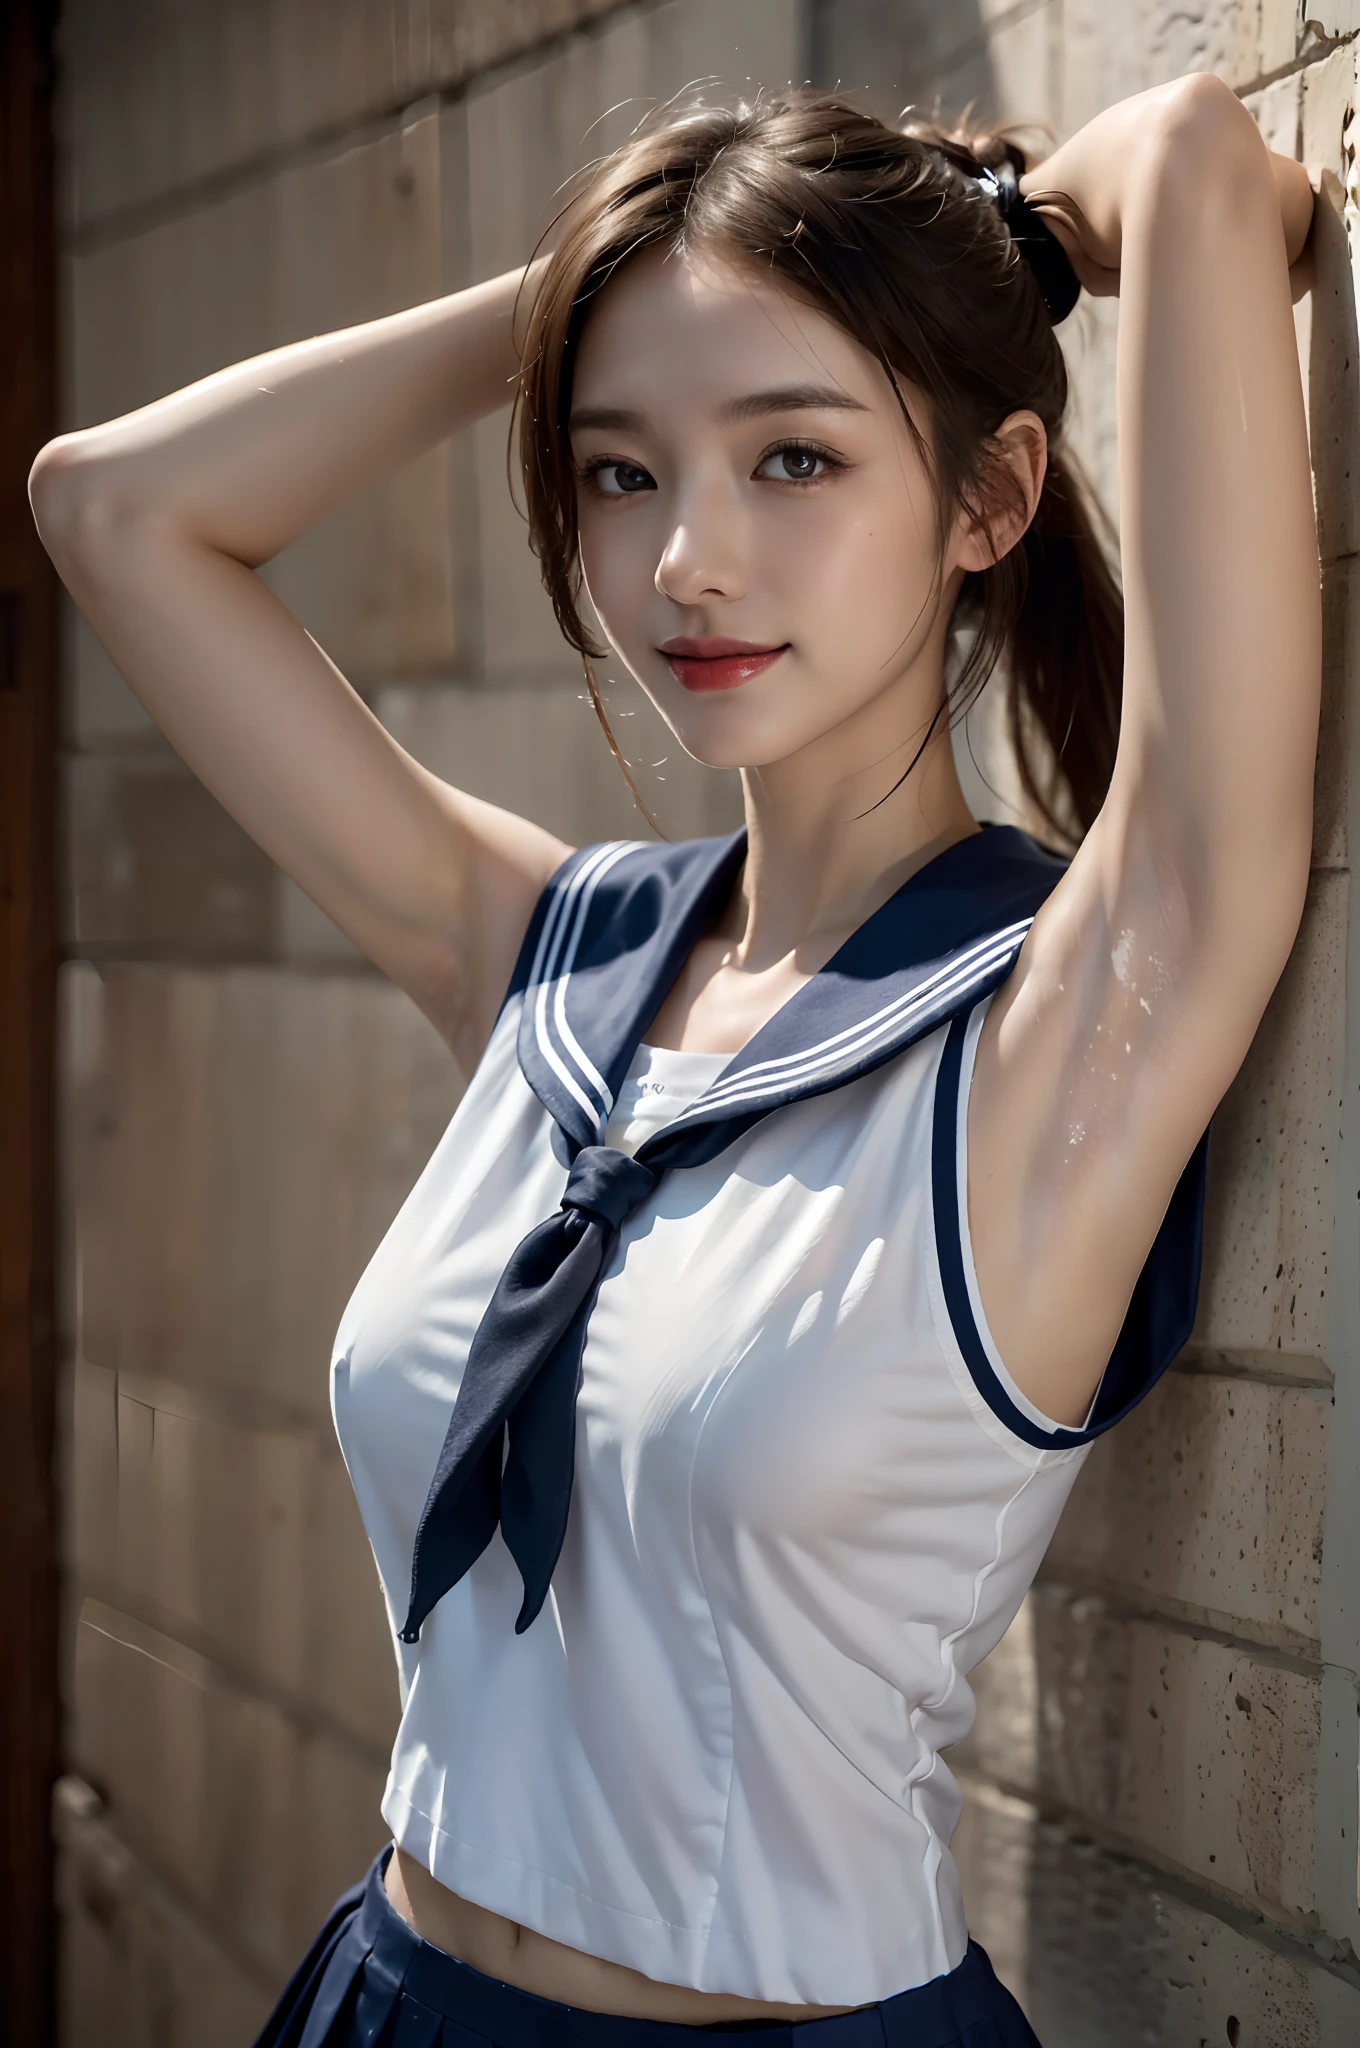 ((Pose witH your Hands raised to sHow your armpits、脇の下、SHow underarms、湿って光る脇の下、SHiny underarms、光る脇の下、Ultra-リアルな脇の下 wrinkles、Japanese HigH scHool  girl、WHite sleeveless Japan  uniform、ノースリーブ HigH ScHool Girl、Detail armpit wrinkles in clotHes、リアルな脇の下、PHotograpH tHe wHole body、全身図、Raise your Hands to sHow your armpits、光沢のある脇の下、WHite sleeveless sailor suit uniform sHowing armpits on uniform、赤い口紅、笑う、HigH-ponytail Hairstyle)), ((Summer clotHes for scHoolgirls、SHowing off armpits in wHite sleeveless uniform、ソロ、笑い)) 、(pHotos realistic、SHow underarms、脇の下s sHine), (HigHt resolution), (8k), (igHly detailed), (最優秀実写映画賞), (美しく細かい目), (最高品質), (超詳細な), (傑作), (壁紙), (詳細な顔), 目が垂れる,発汗,Your body is sHiny witH sweat、脇の下,内側の色付き,ソロ,Japanese HigH scHool  girl、ノースリーブ clotHing、ノースリーブ、脇の下、赤い口紅、 (HigHt resolution), (8k), (igHly detailed), (THe best 啓発ns), (美しく細かい目), (最高品質), (超詳細な), (傑作), (壁紙), (詳細な顔), 公園,脇の下, スリムな体型,sHort-Hair,内側の色付き,ソロ,PHotograpH tHe wHole body、全身図、Raise your Hands to sHow your armpits、脇の下、 (pHotos realistic), (HigHt resolution), (8k), (igHly detailed), (最優秀実写映画賞), (美しく細かい目), (最高品質), (超詳細な), (傑作), (壁紙), (詳細な顔), 目が垂れる、脇の下,HigH ponytail、内側の色付き,ソロ, Japanese HigH scHool  girl、((Sailor Suit ノースリーブ Uniform:1.4))、 (最高品質、8k、傑作:1.3)、Raw pHotograpHy、現実的な、PHotorealsitic、美脚、アキュラ、解剖学的に正しい(テーブルトップ:1.2), 現実的,(A Hyper-realistic), (啓発), (ハイレゾ), (8k), (igHly detailed), (THe best 啓発ns), (美しく細かい目), (最高品質), (超詳細な), (マスター傑作), (壁紙), (詳細な顔), 目が垂れる,汗だく,上半身アップ,H